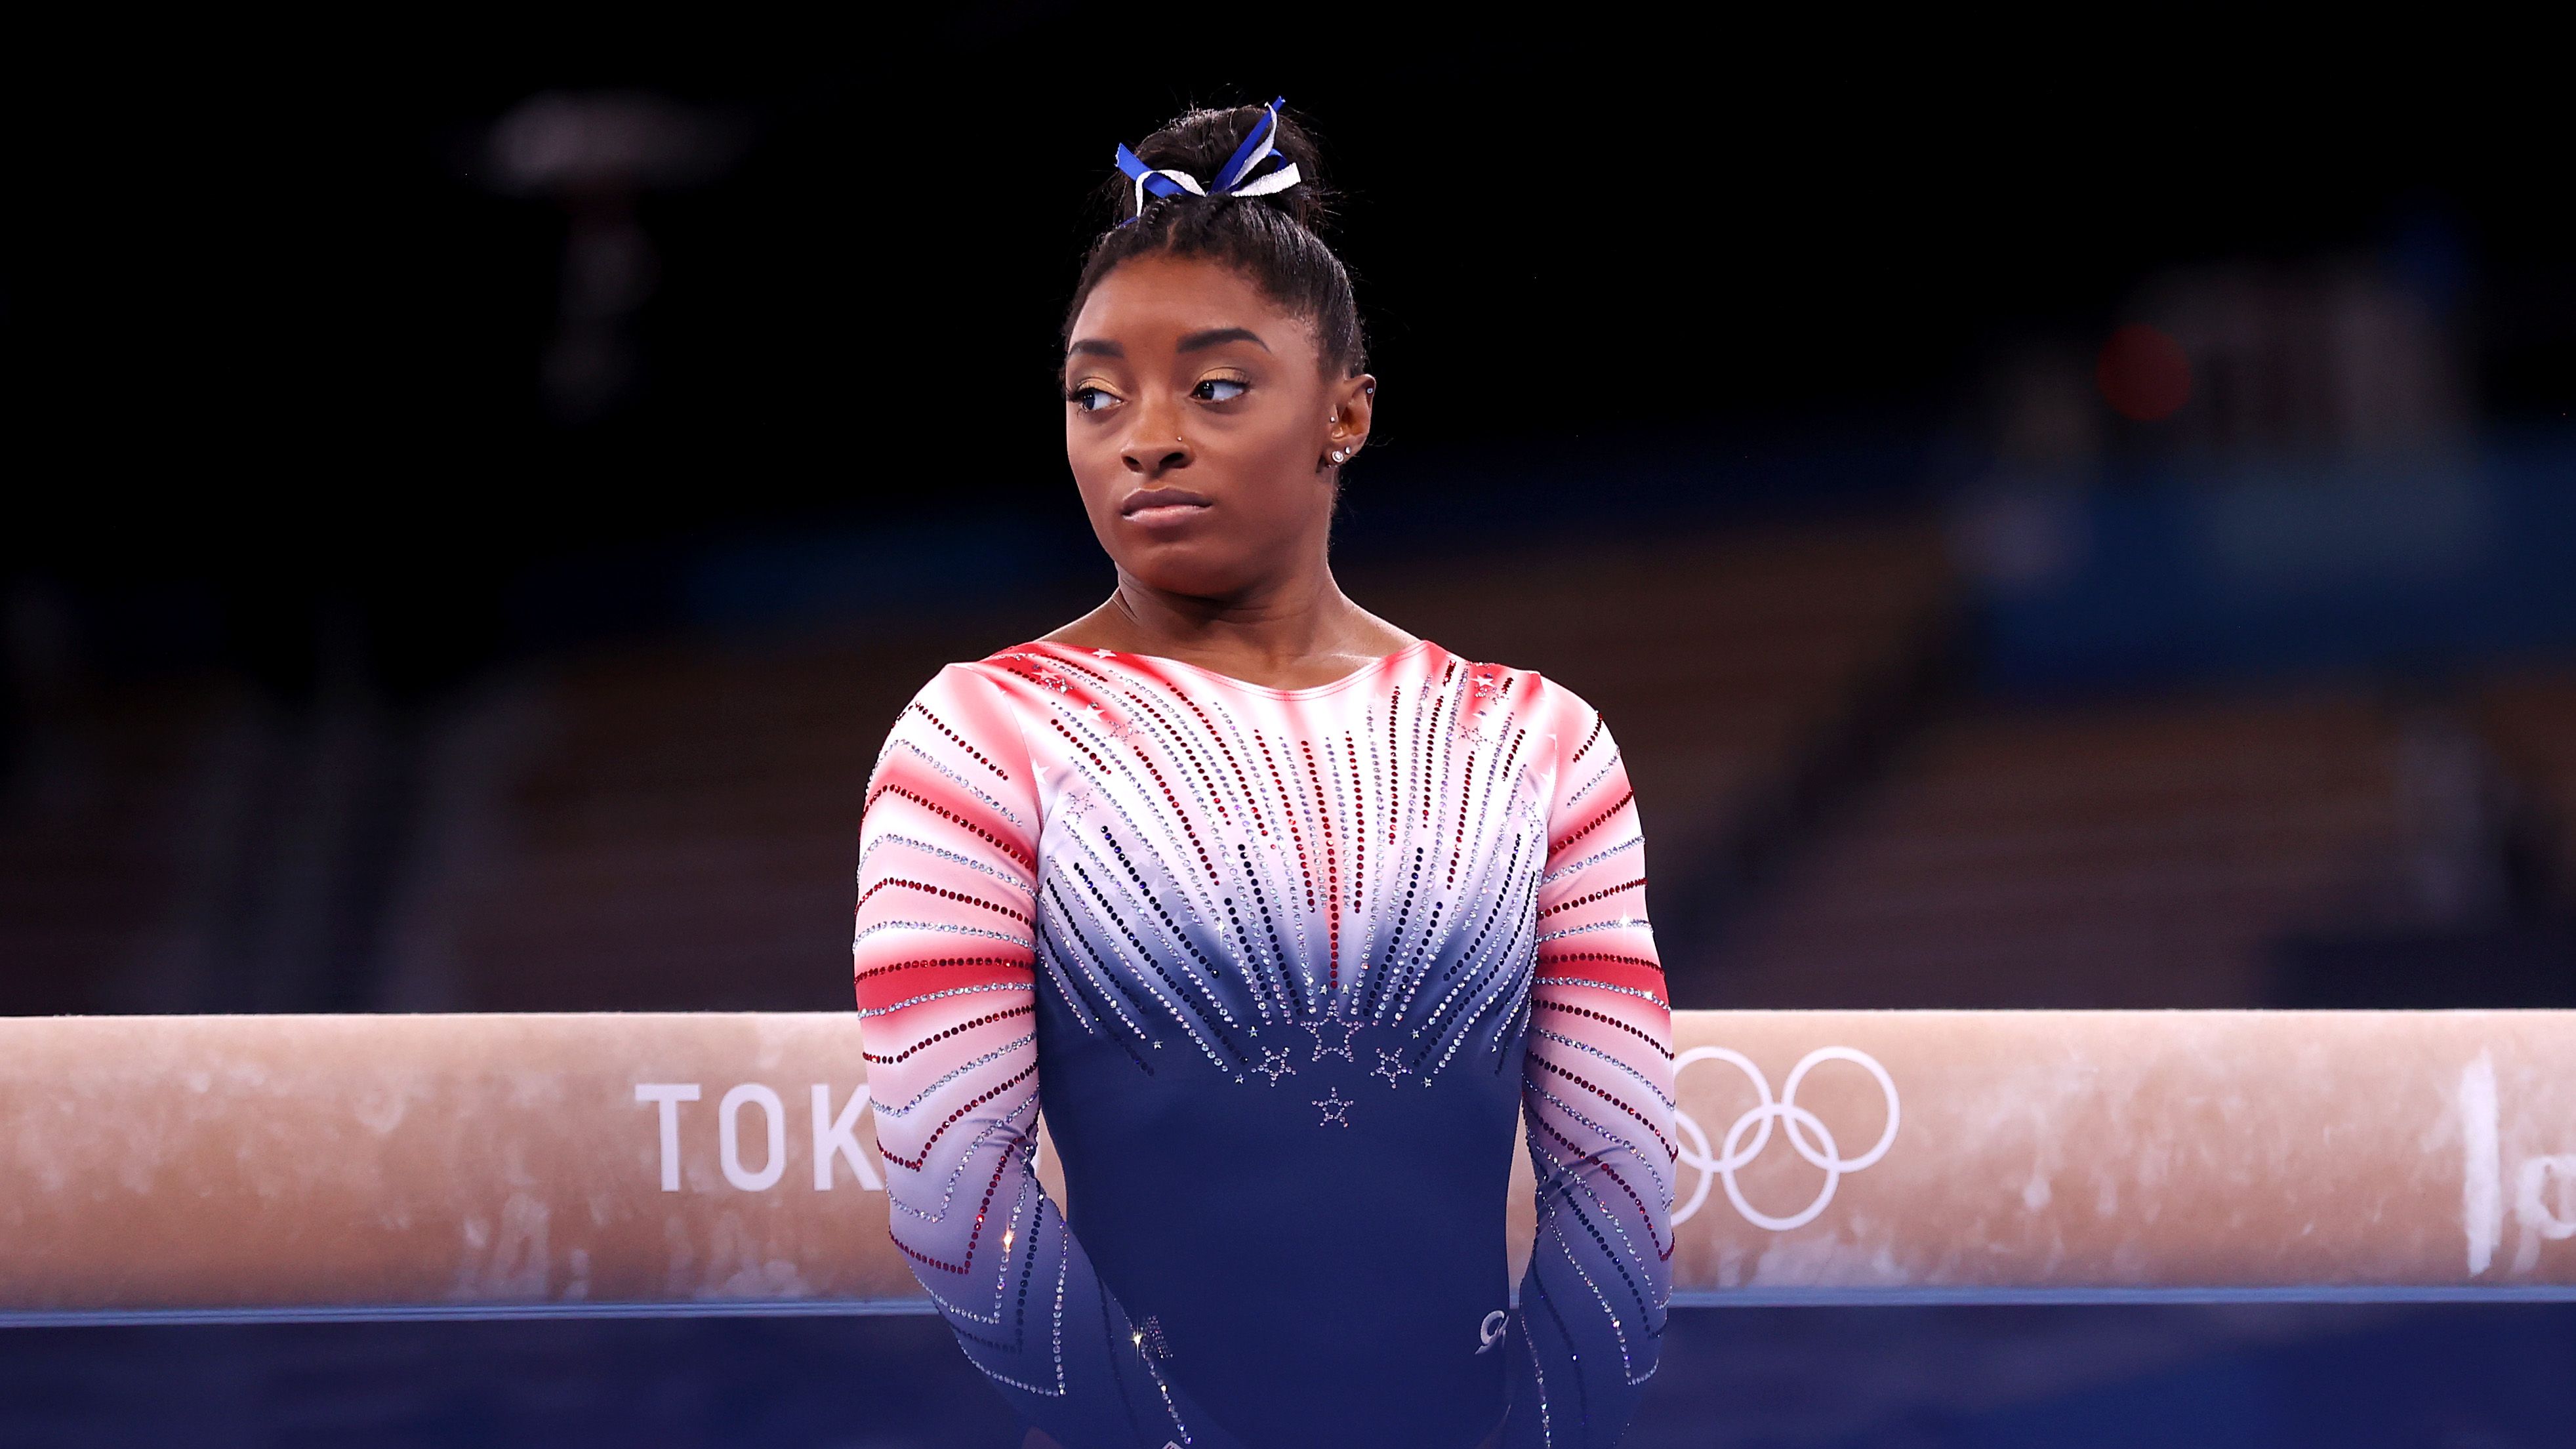 Who Is Simone Biles? What to Know About the Olympic Gymnast